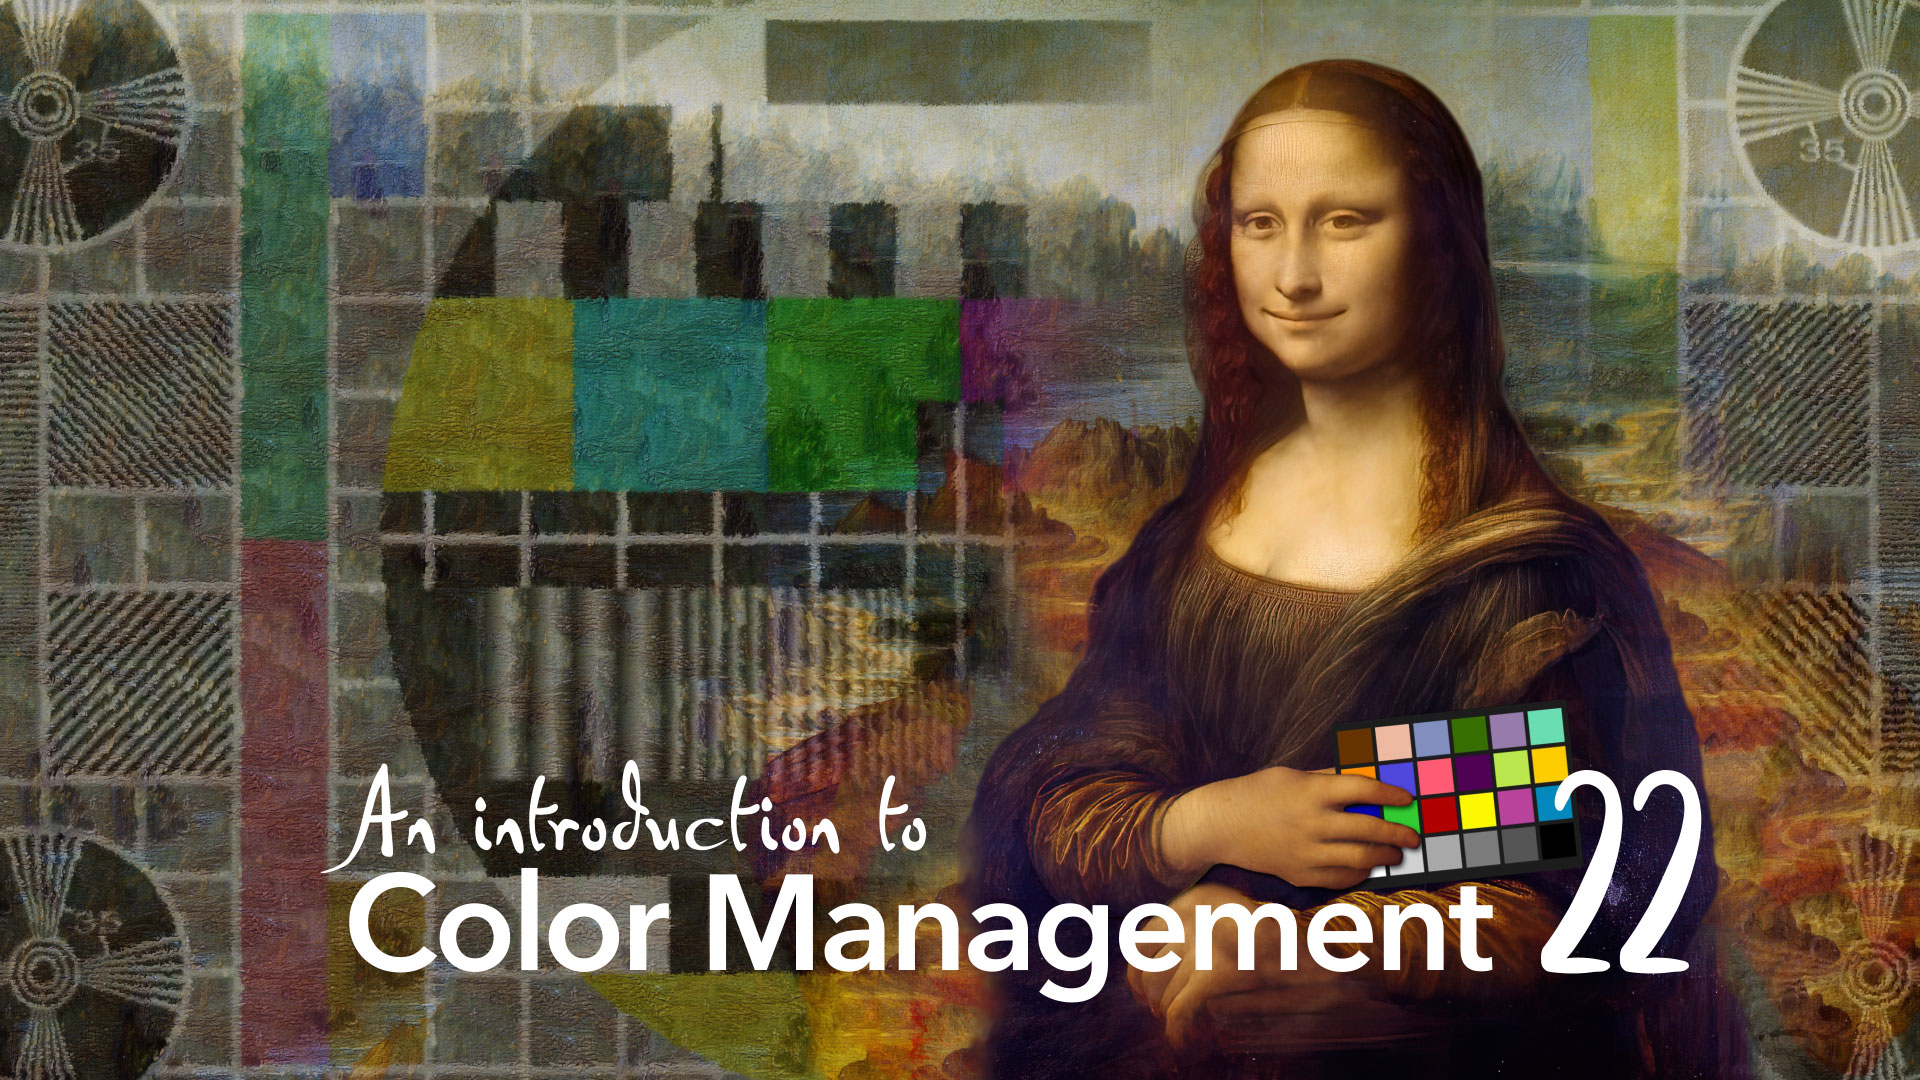 Color Management Part 22: Introducing Tone Mapping 7